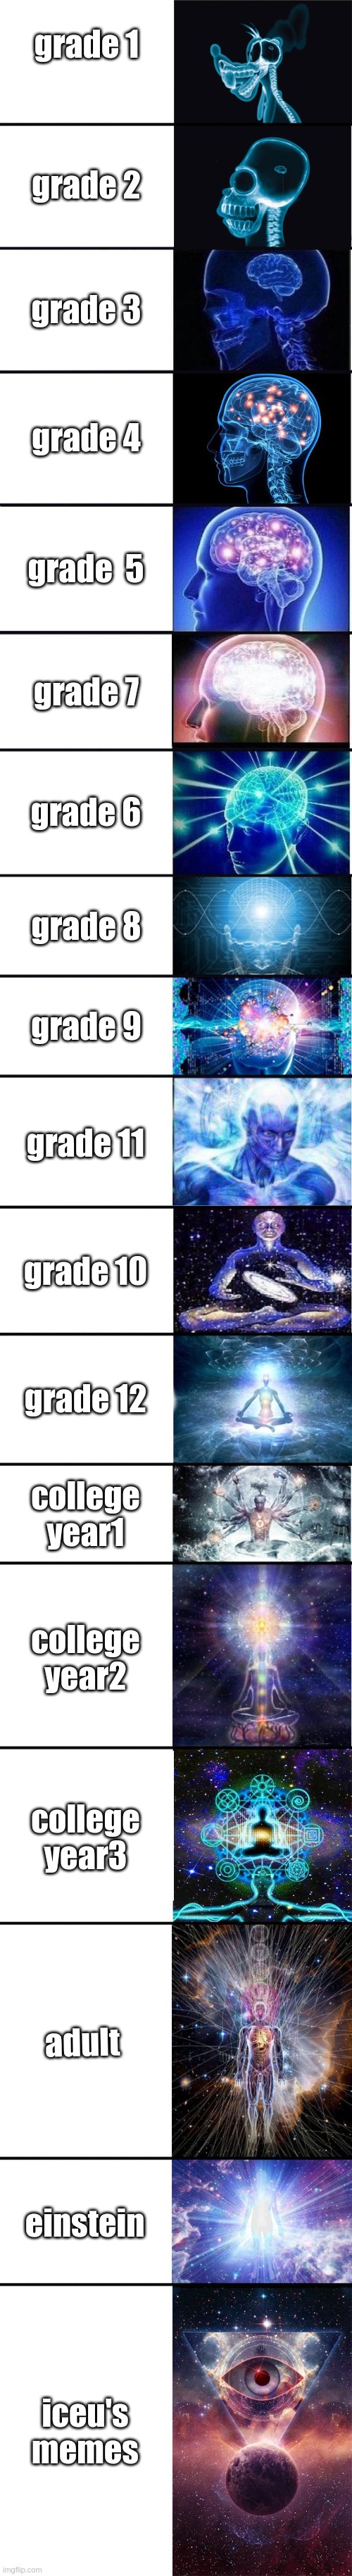 brain | grade 1; grade 2; grade 3; grade 4; grade  5; grade 7; grade 6; grade 8; grade 9; grade 11; grade 10; grade 12; college year1; college year2; college year3; adult; einstein; iceu's memes | image tagged in expanding brain 9001 | made w/ Imgflip meme maker